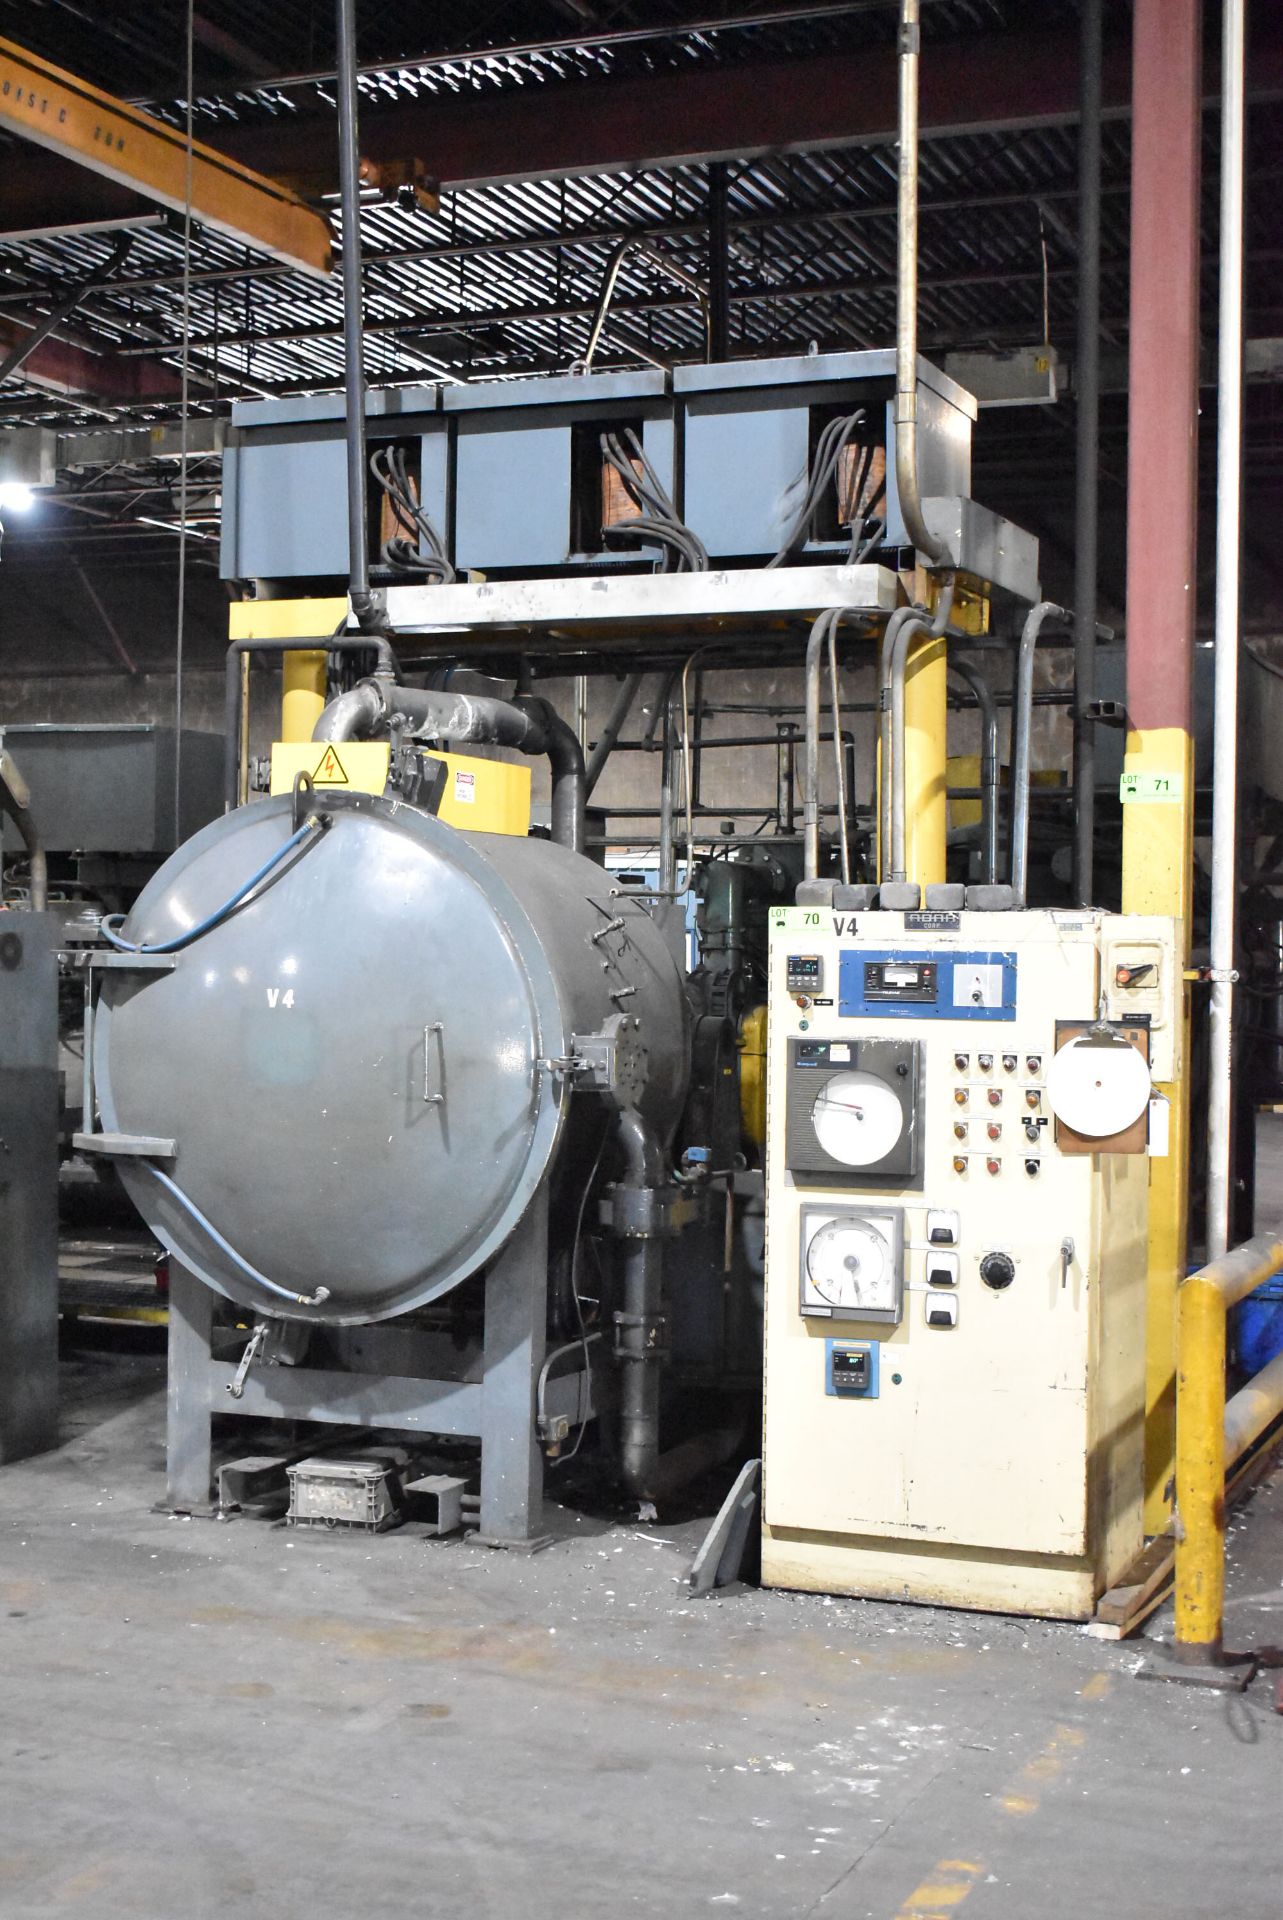 ABAR HR 34-T ELECTRIC VACUUM FURNACE WITH 1500 DEGREES F MAX TEMP, 24"Wx24"Hx36"D APPROX SIZE, 1,